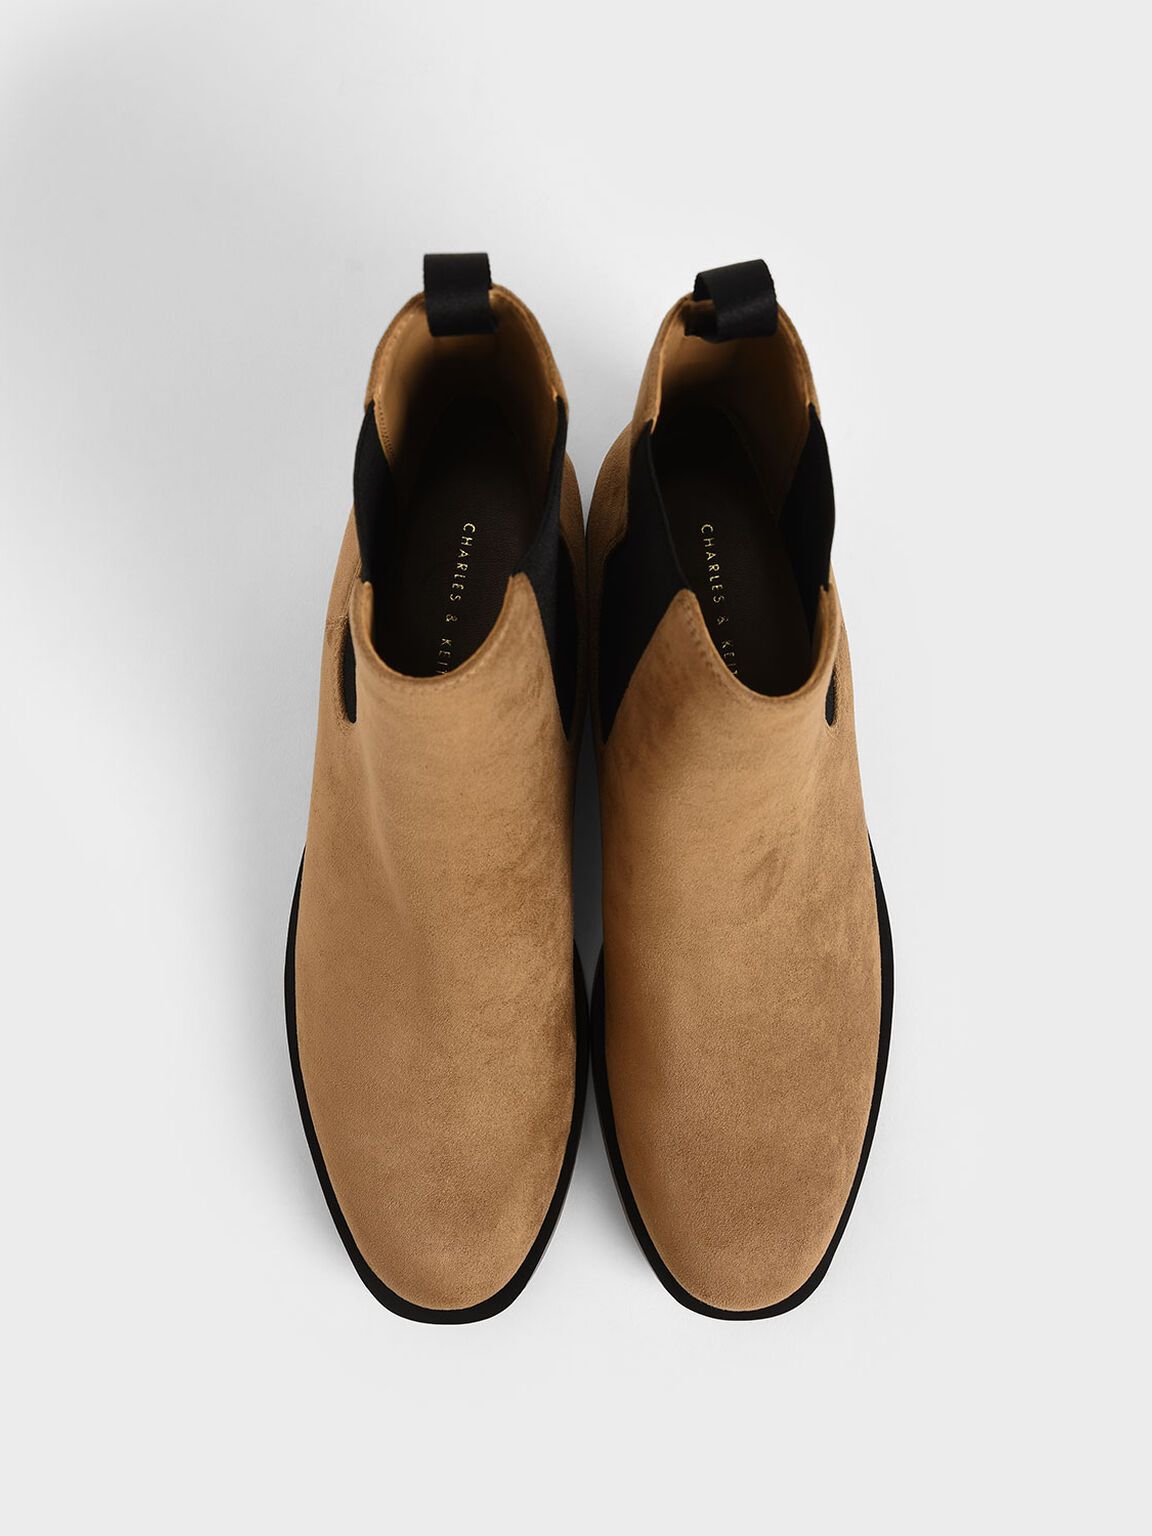 Textured Round Toe Chelsea Boots, Camel, hi-res